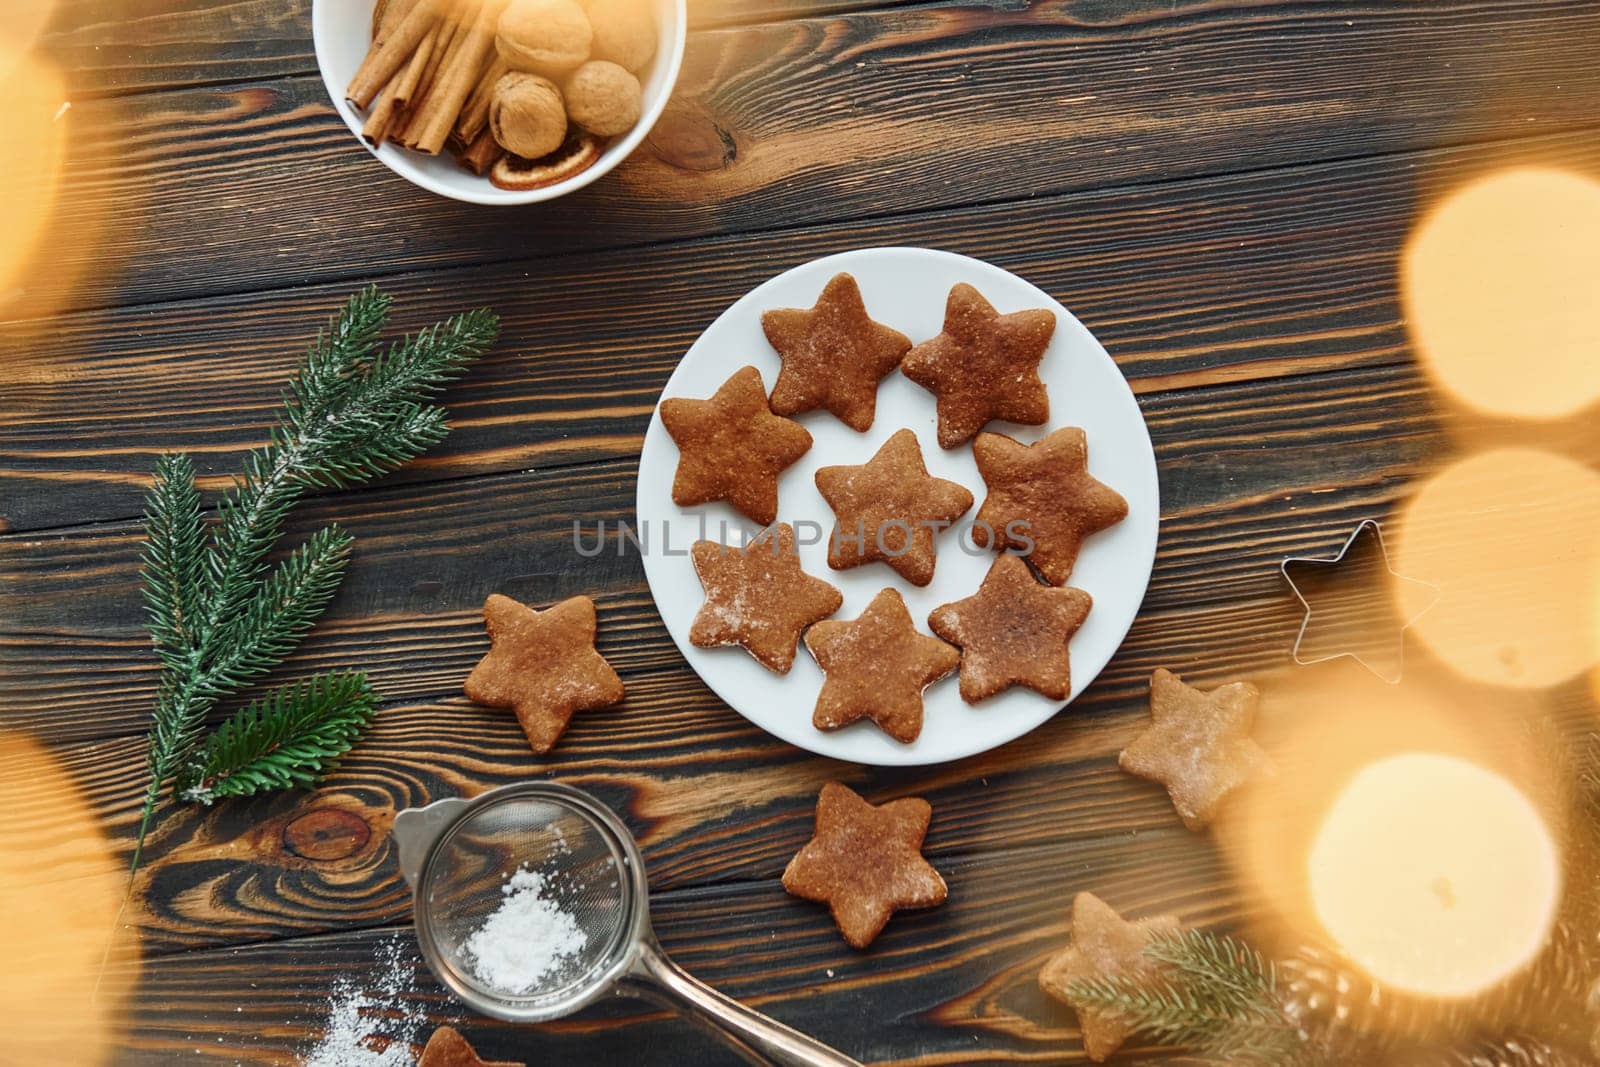 Cookies is on the plate. Christmas background with holiday decoration.